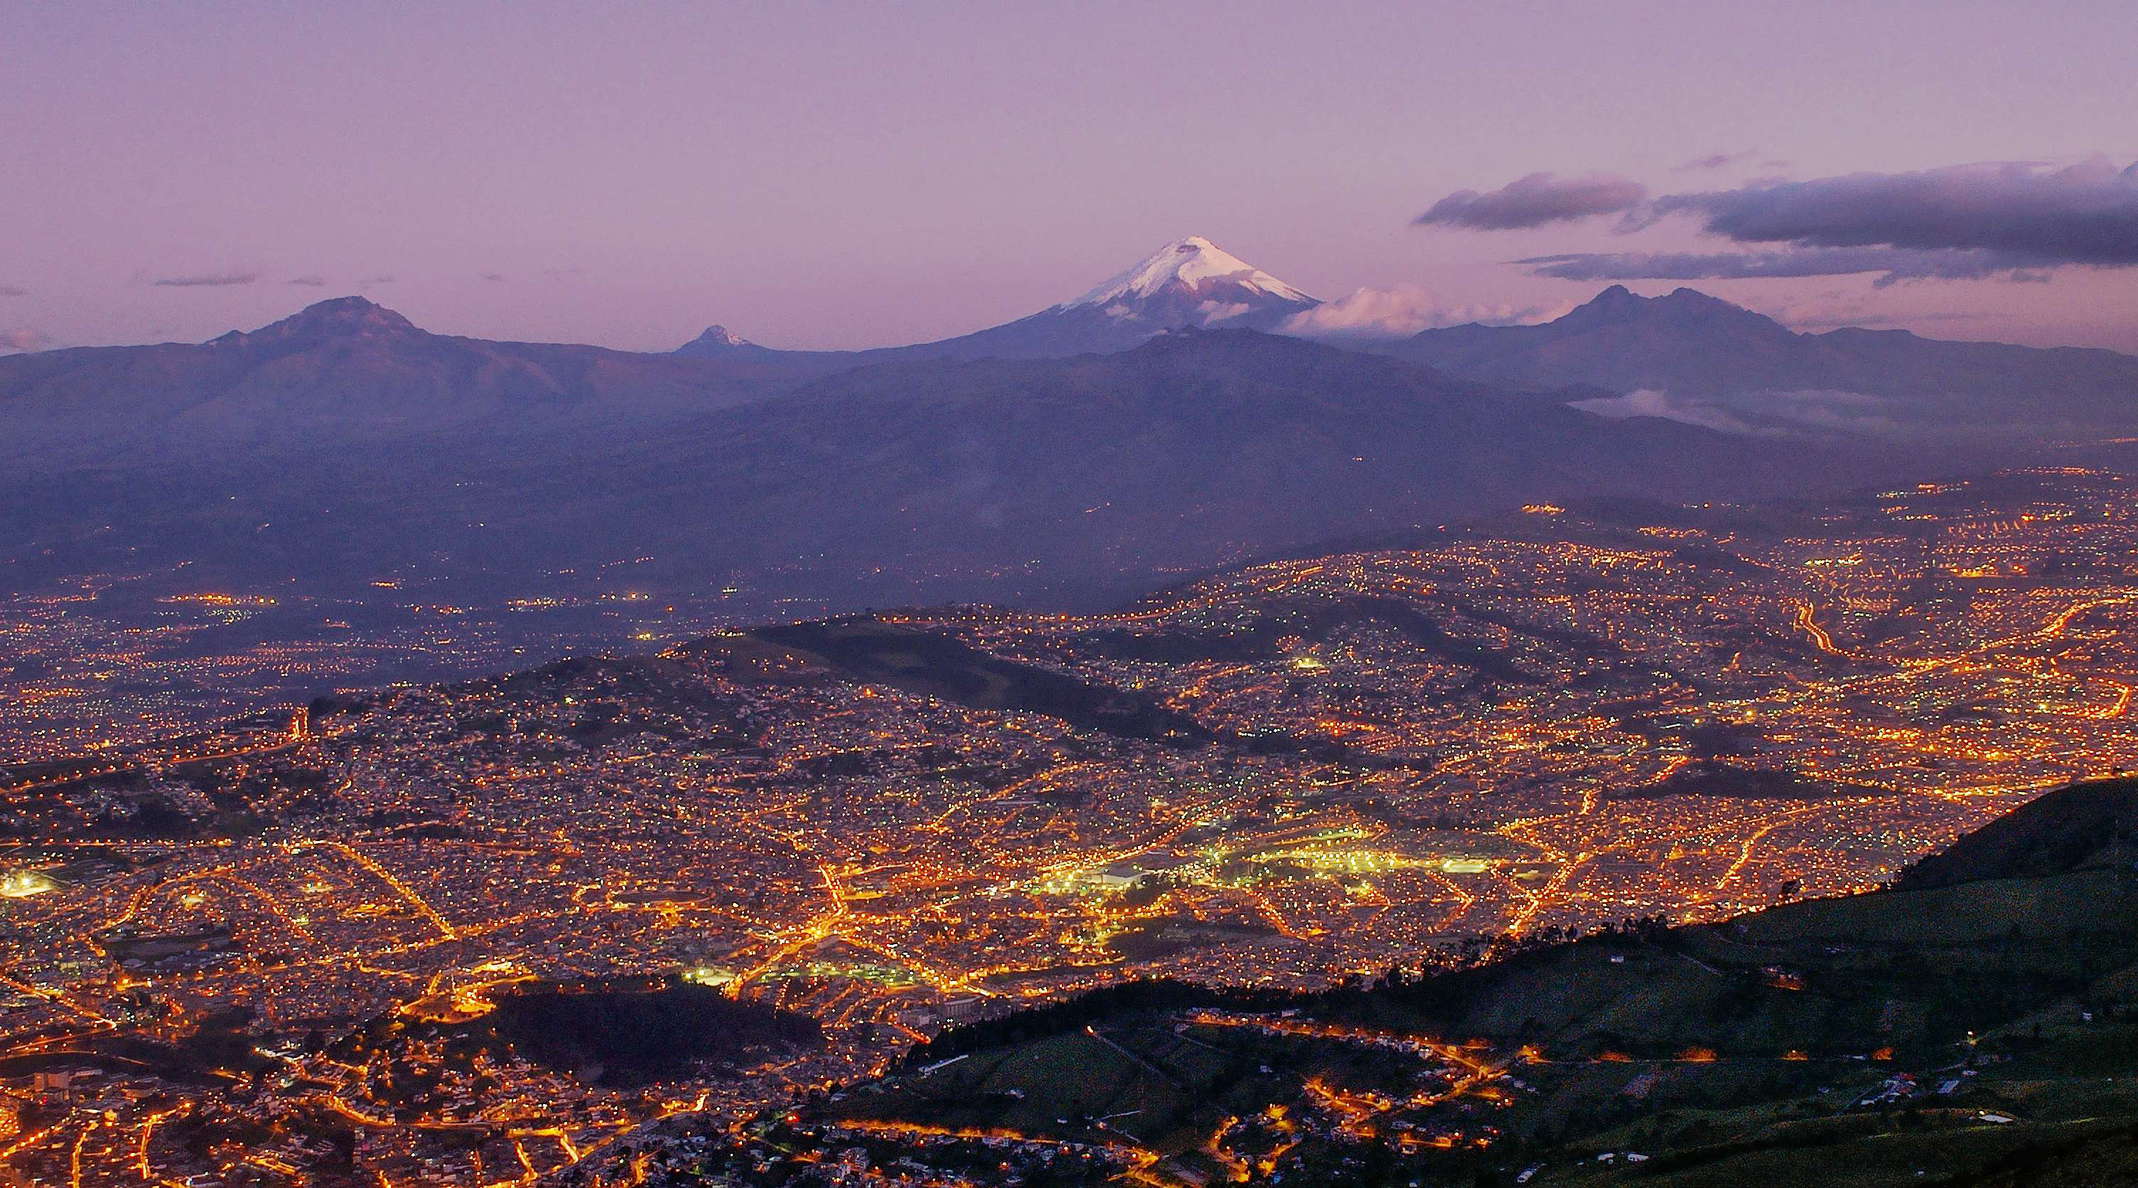 Quito with Volcán Cotopaxi